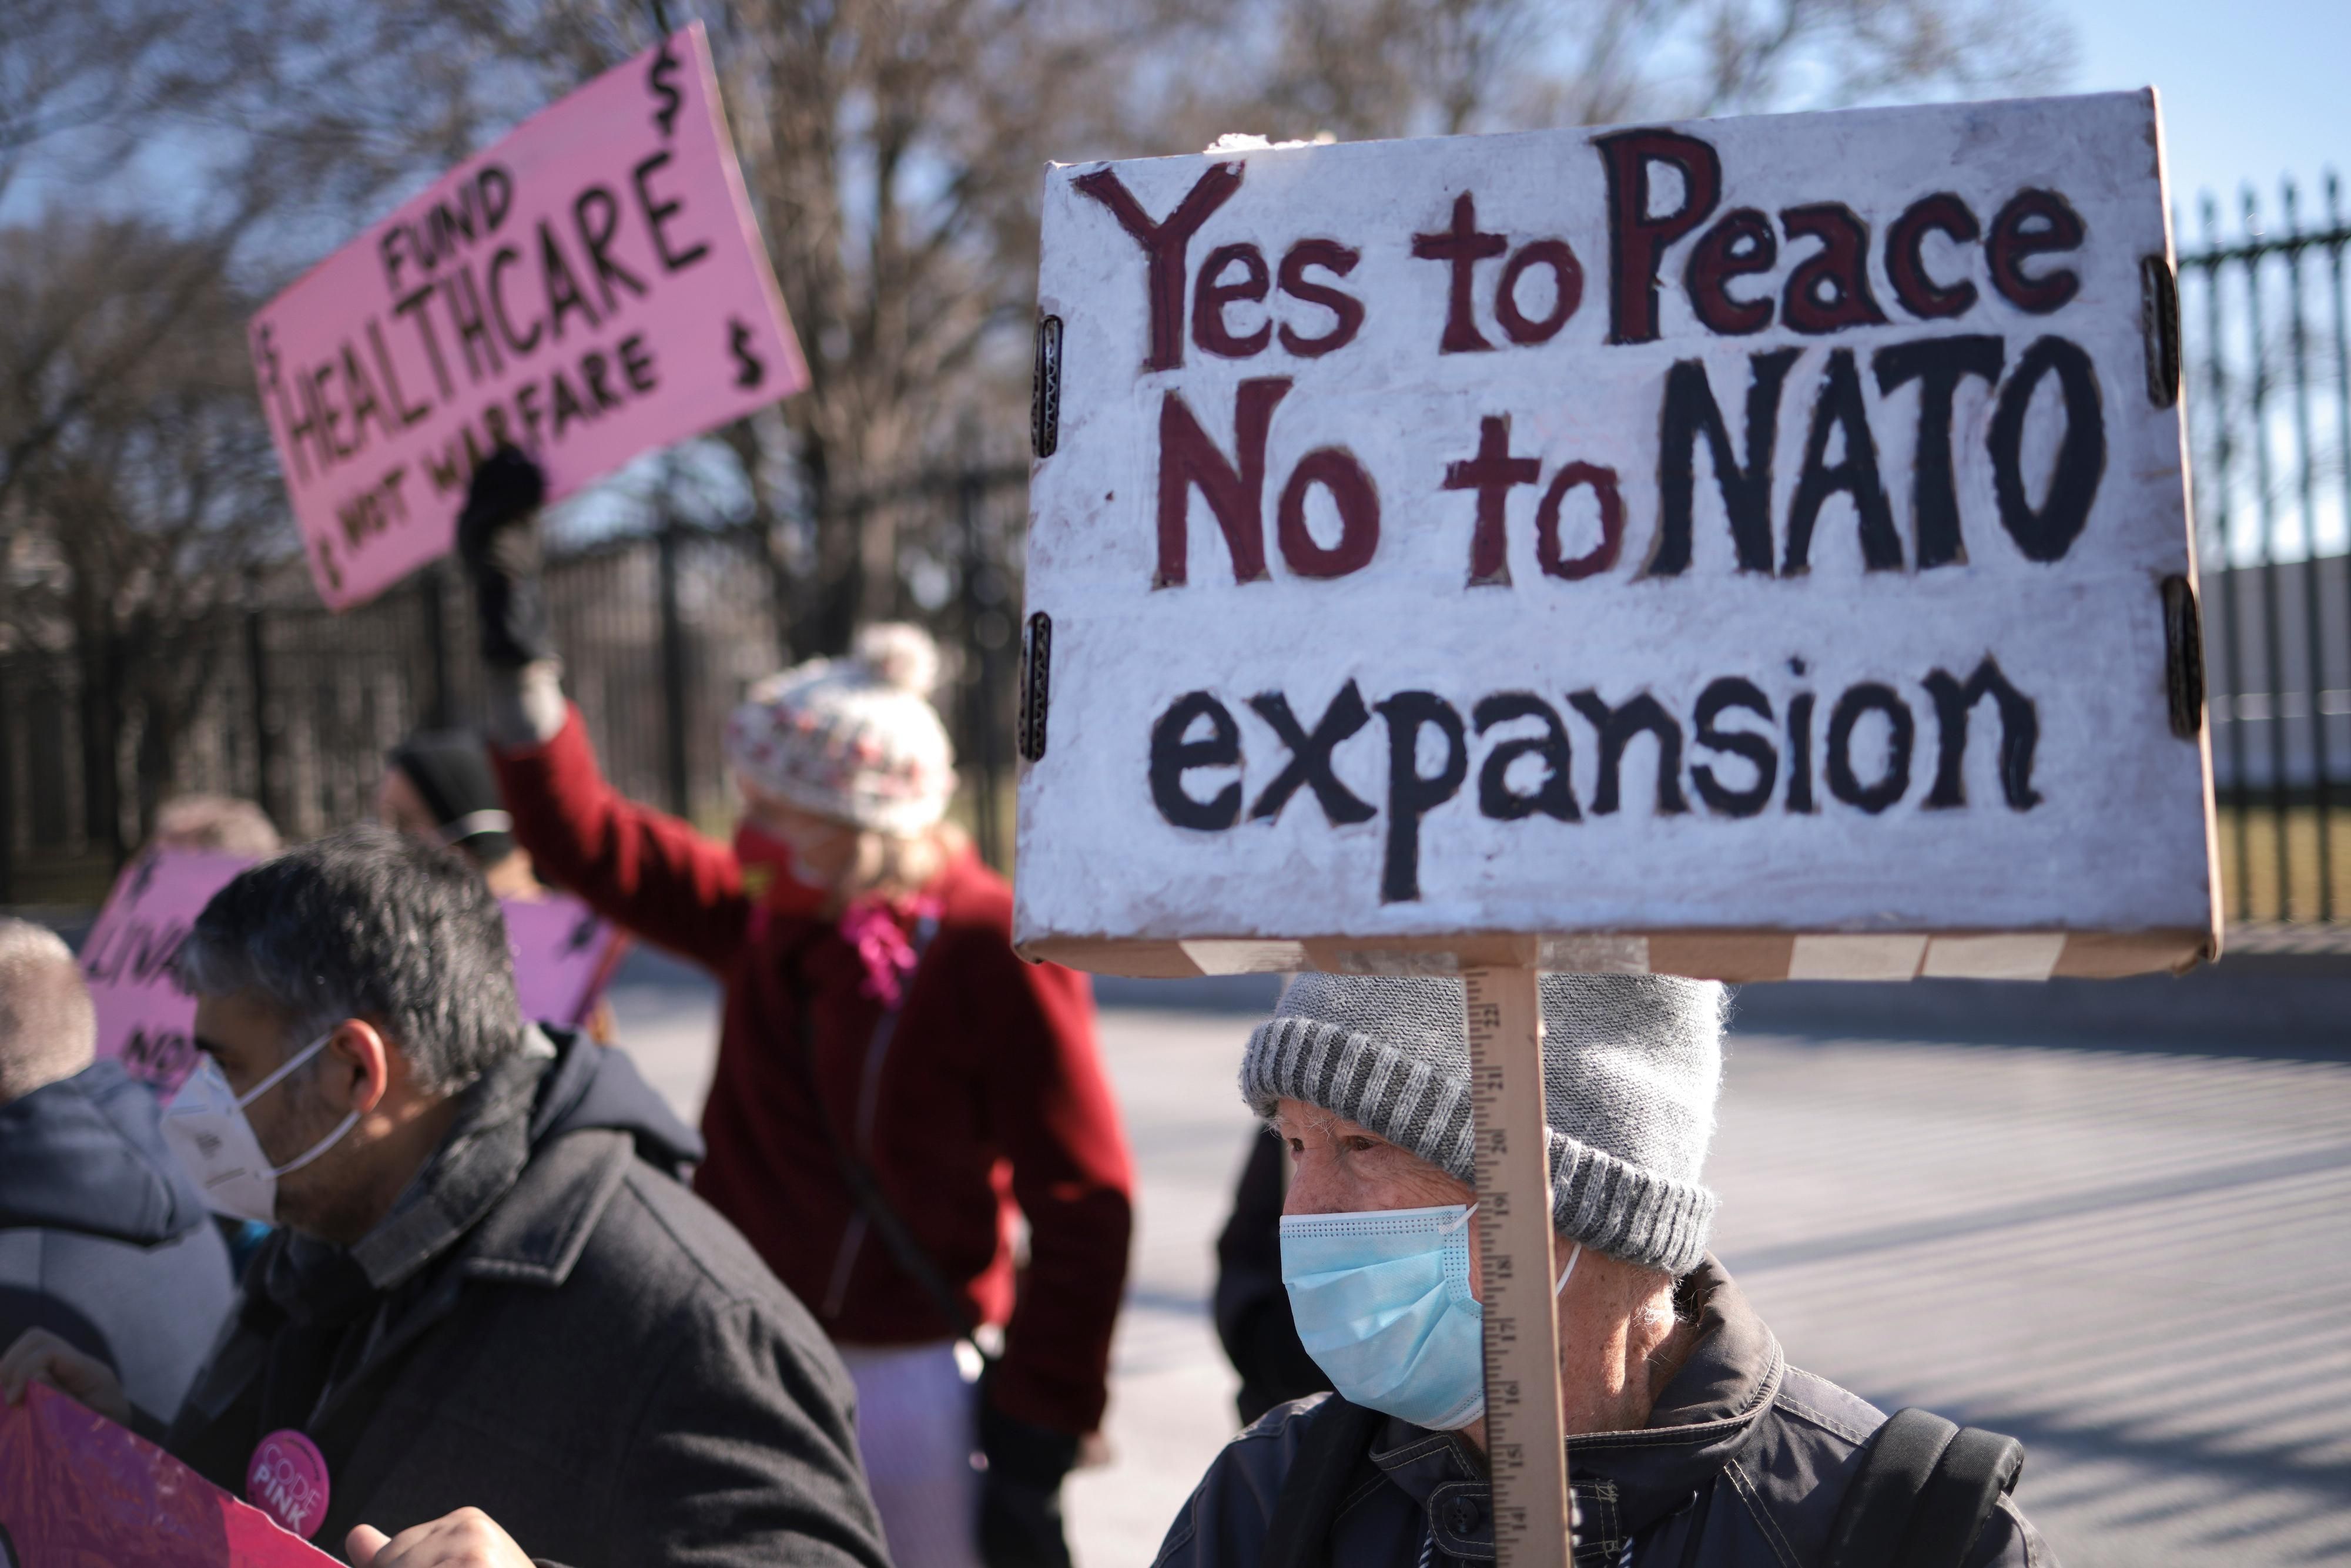 Anti-war protesters outside the White House urging against escalation with Russia